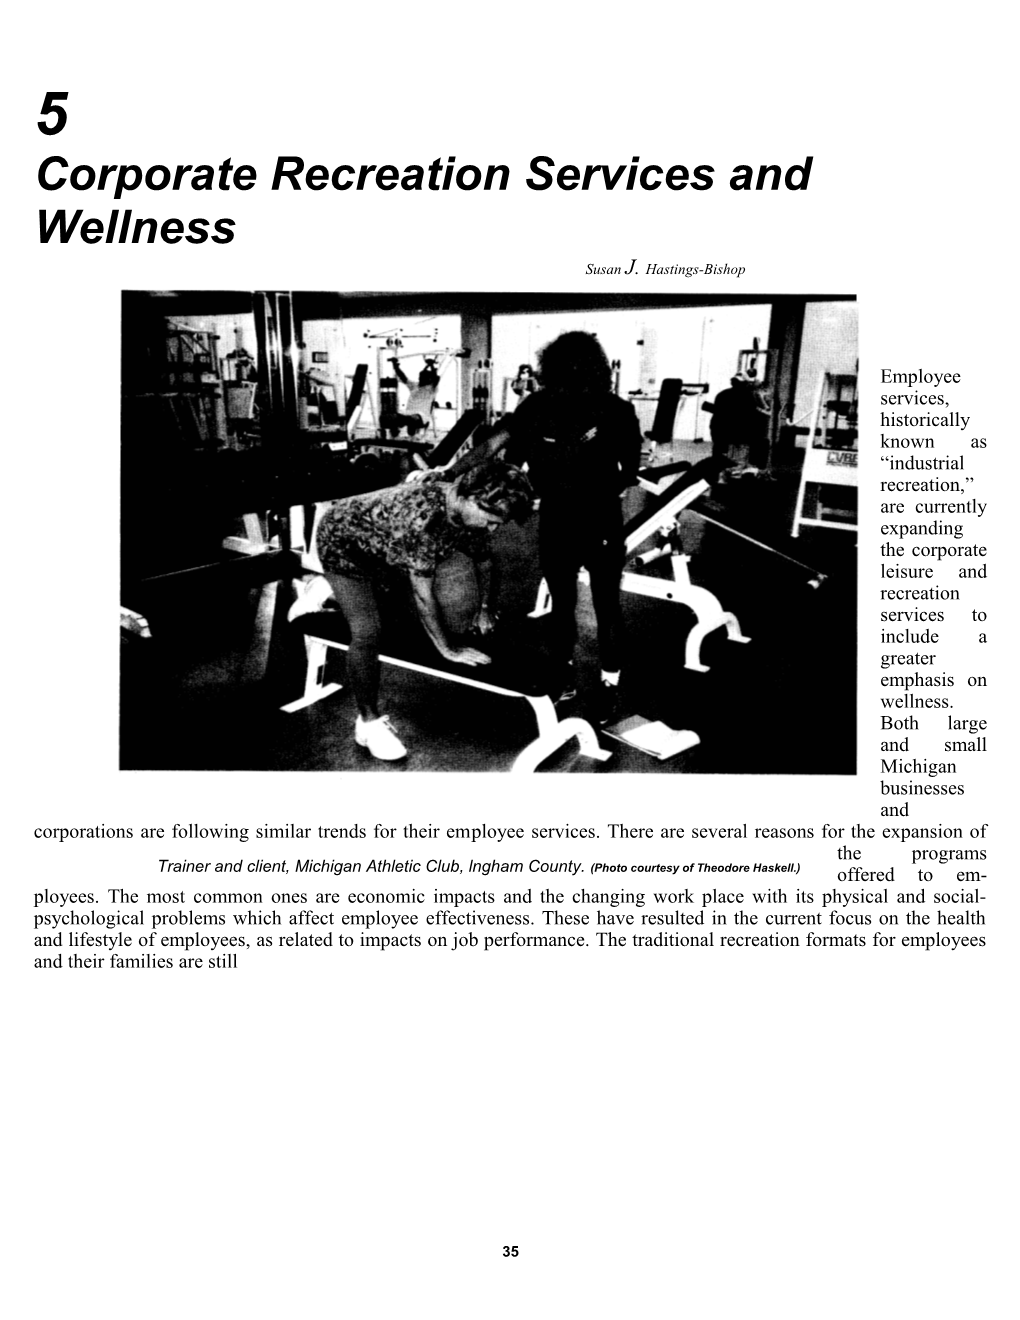 Corporate Recreation Services and Wellness